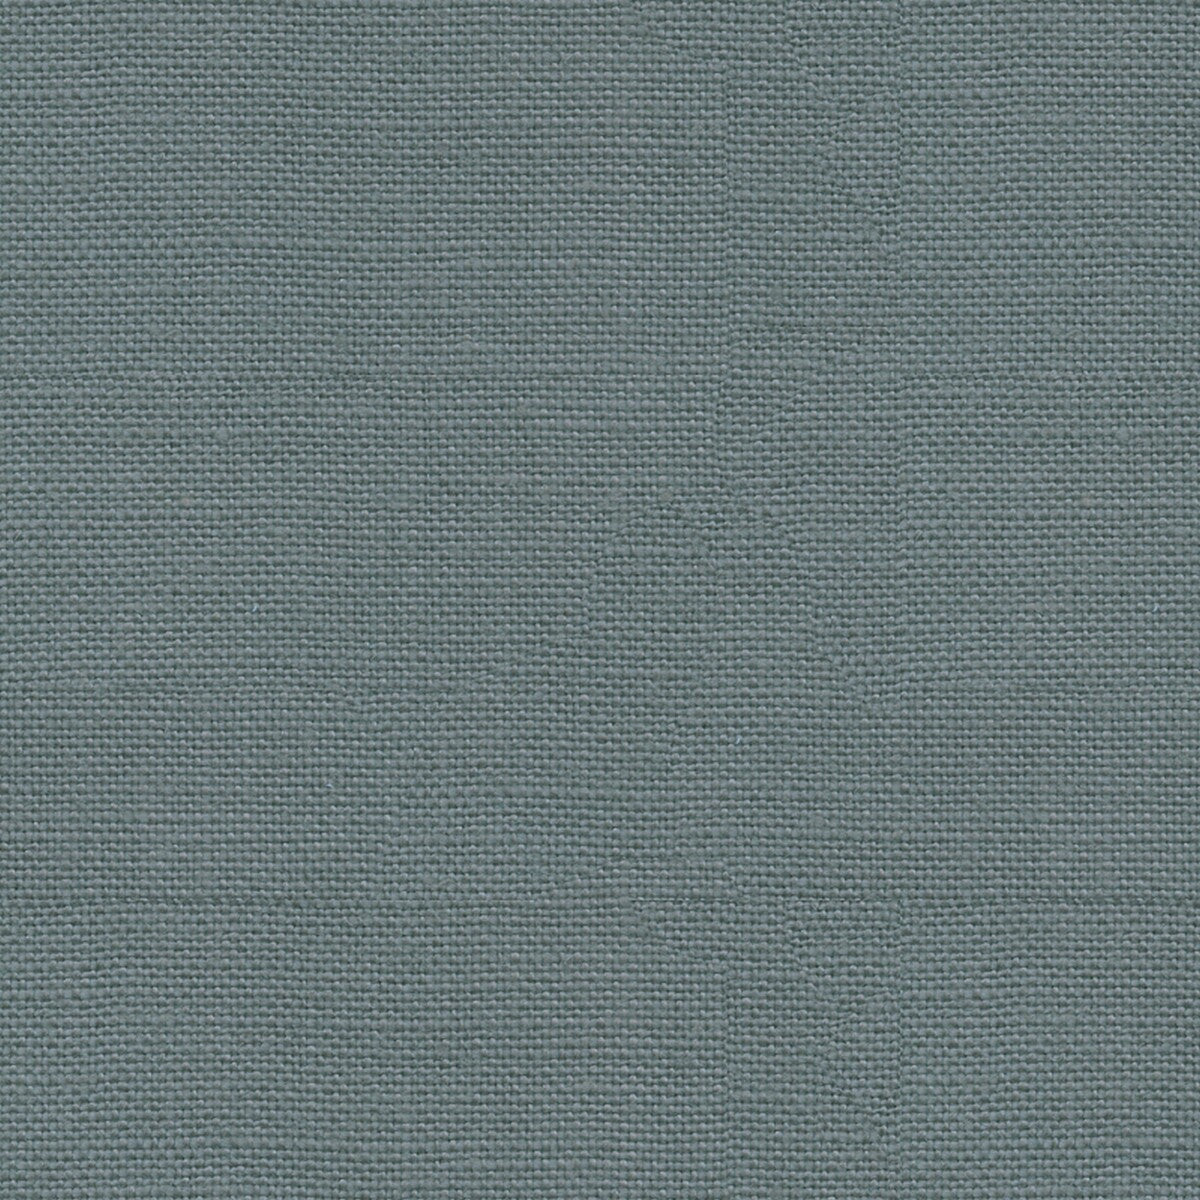 Weekend Linen fabric in marine blue color - pattern FD698.H103.0 - by Mulberry in the Crayford collection